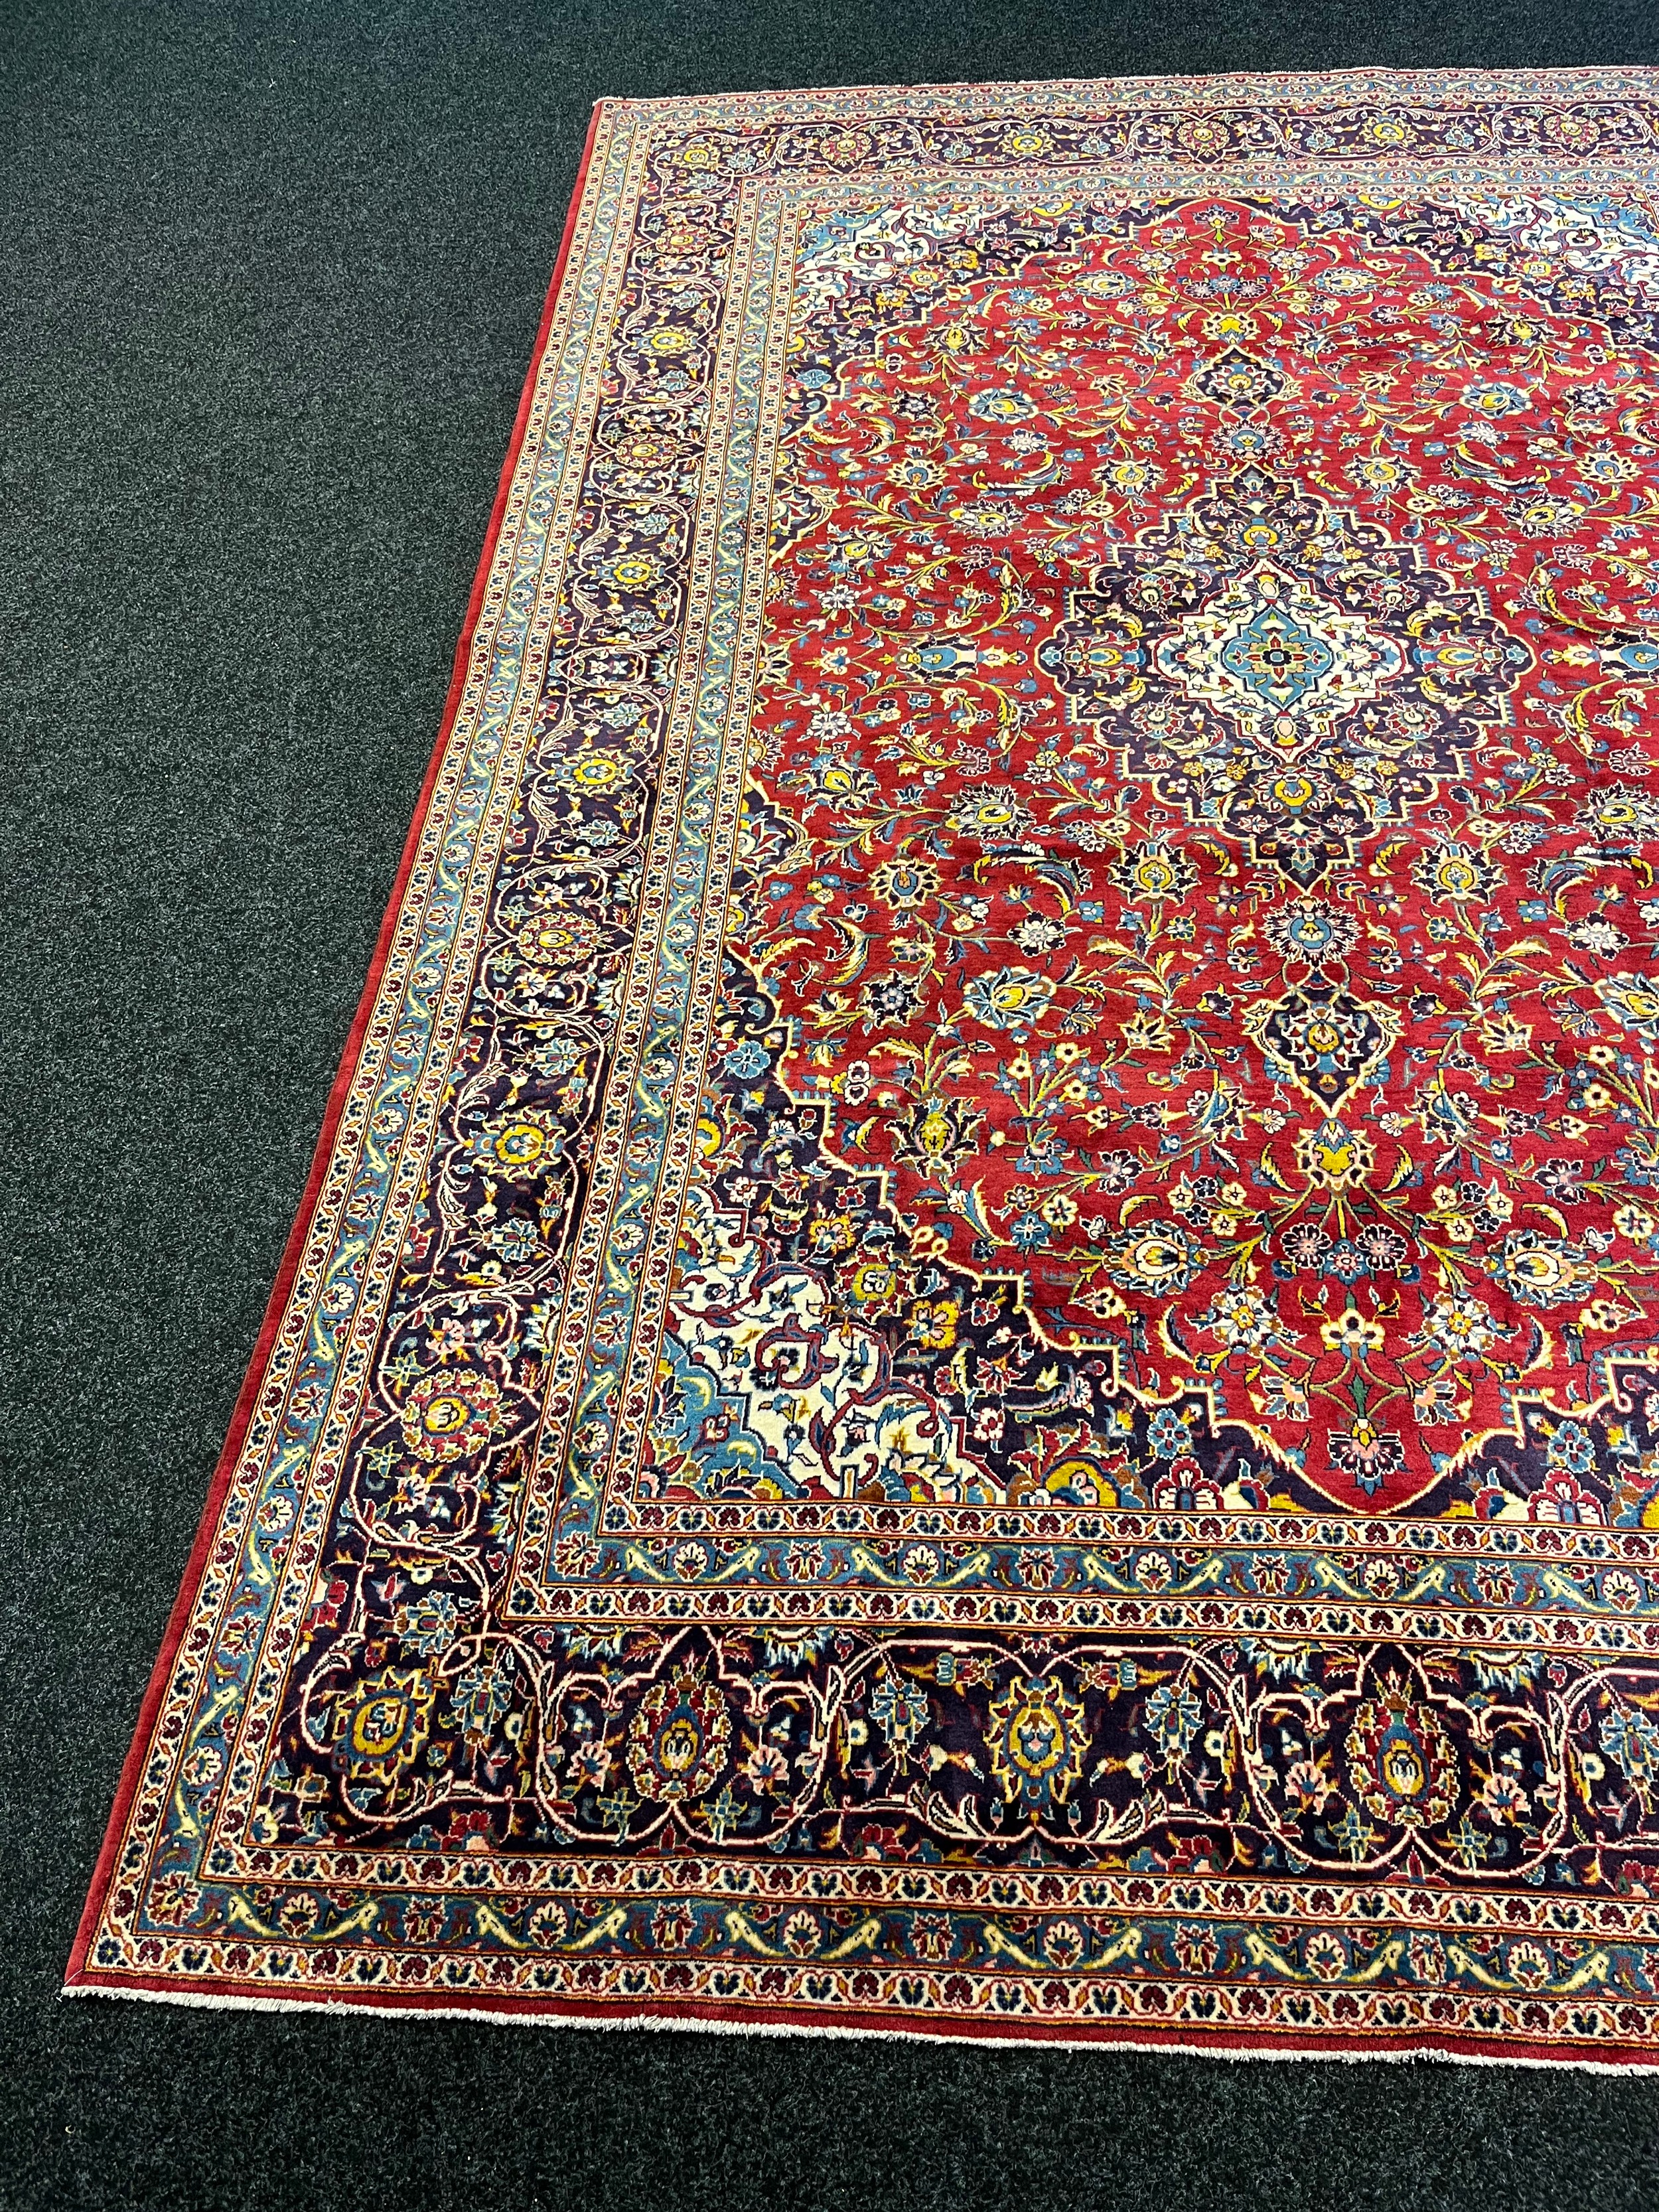 Large Persian carpet/rug, highly decorative with red ground. [535x296cm] - Image 2 of 7